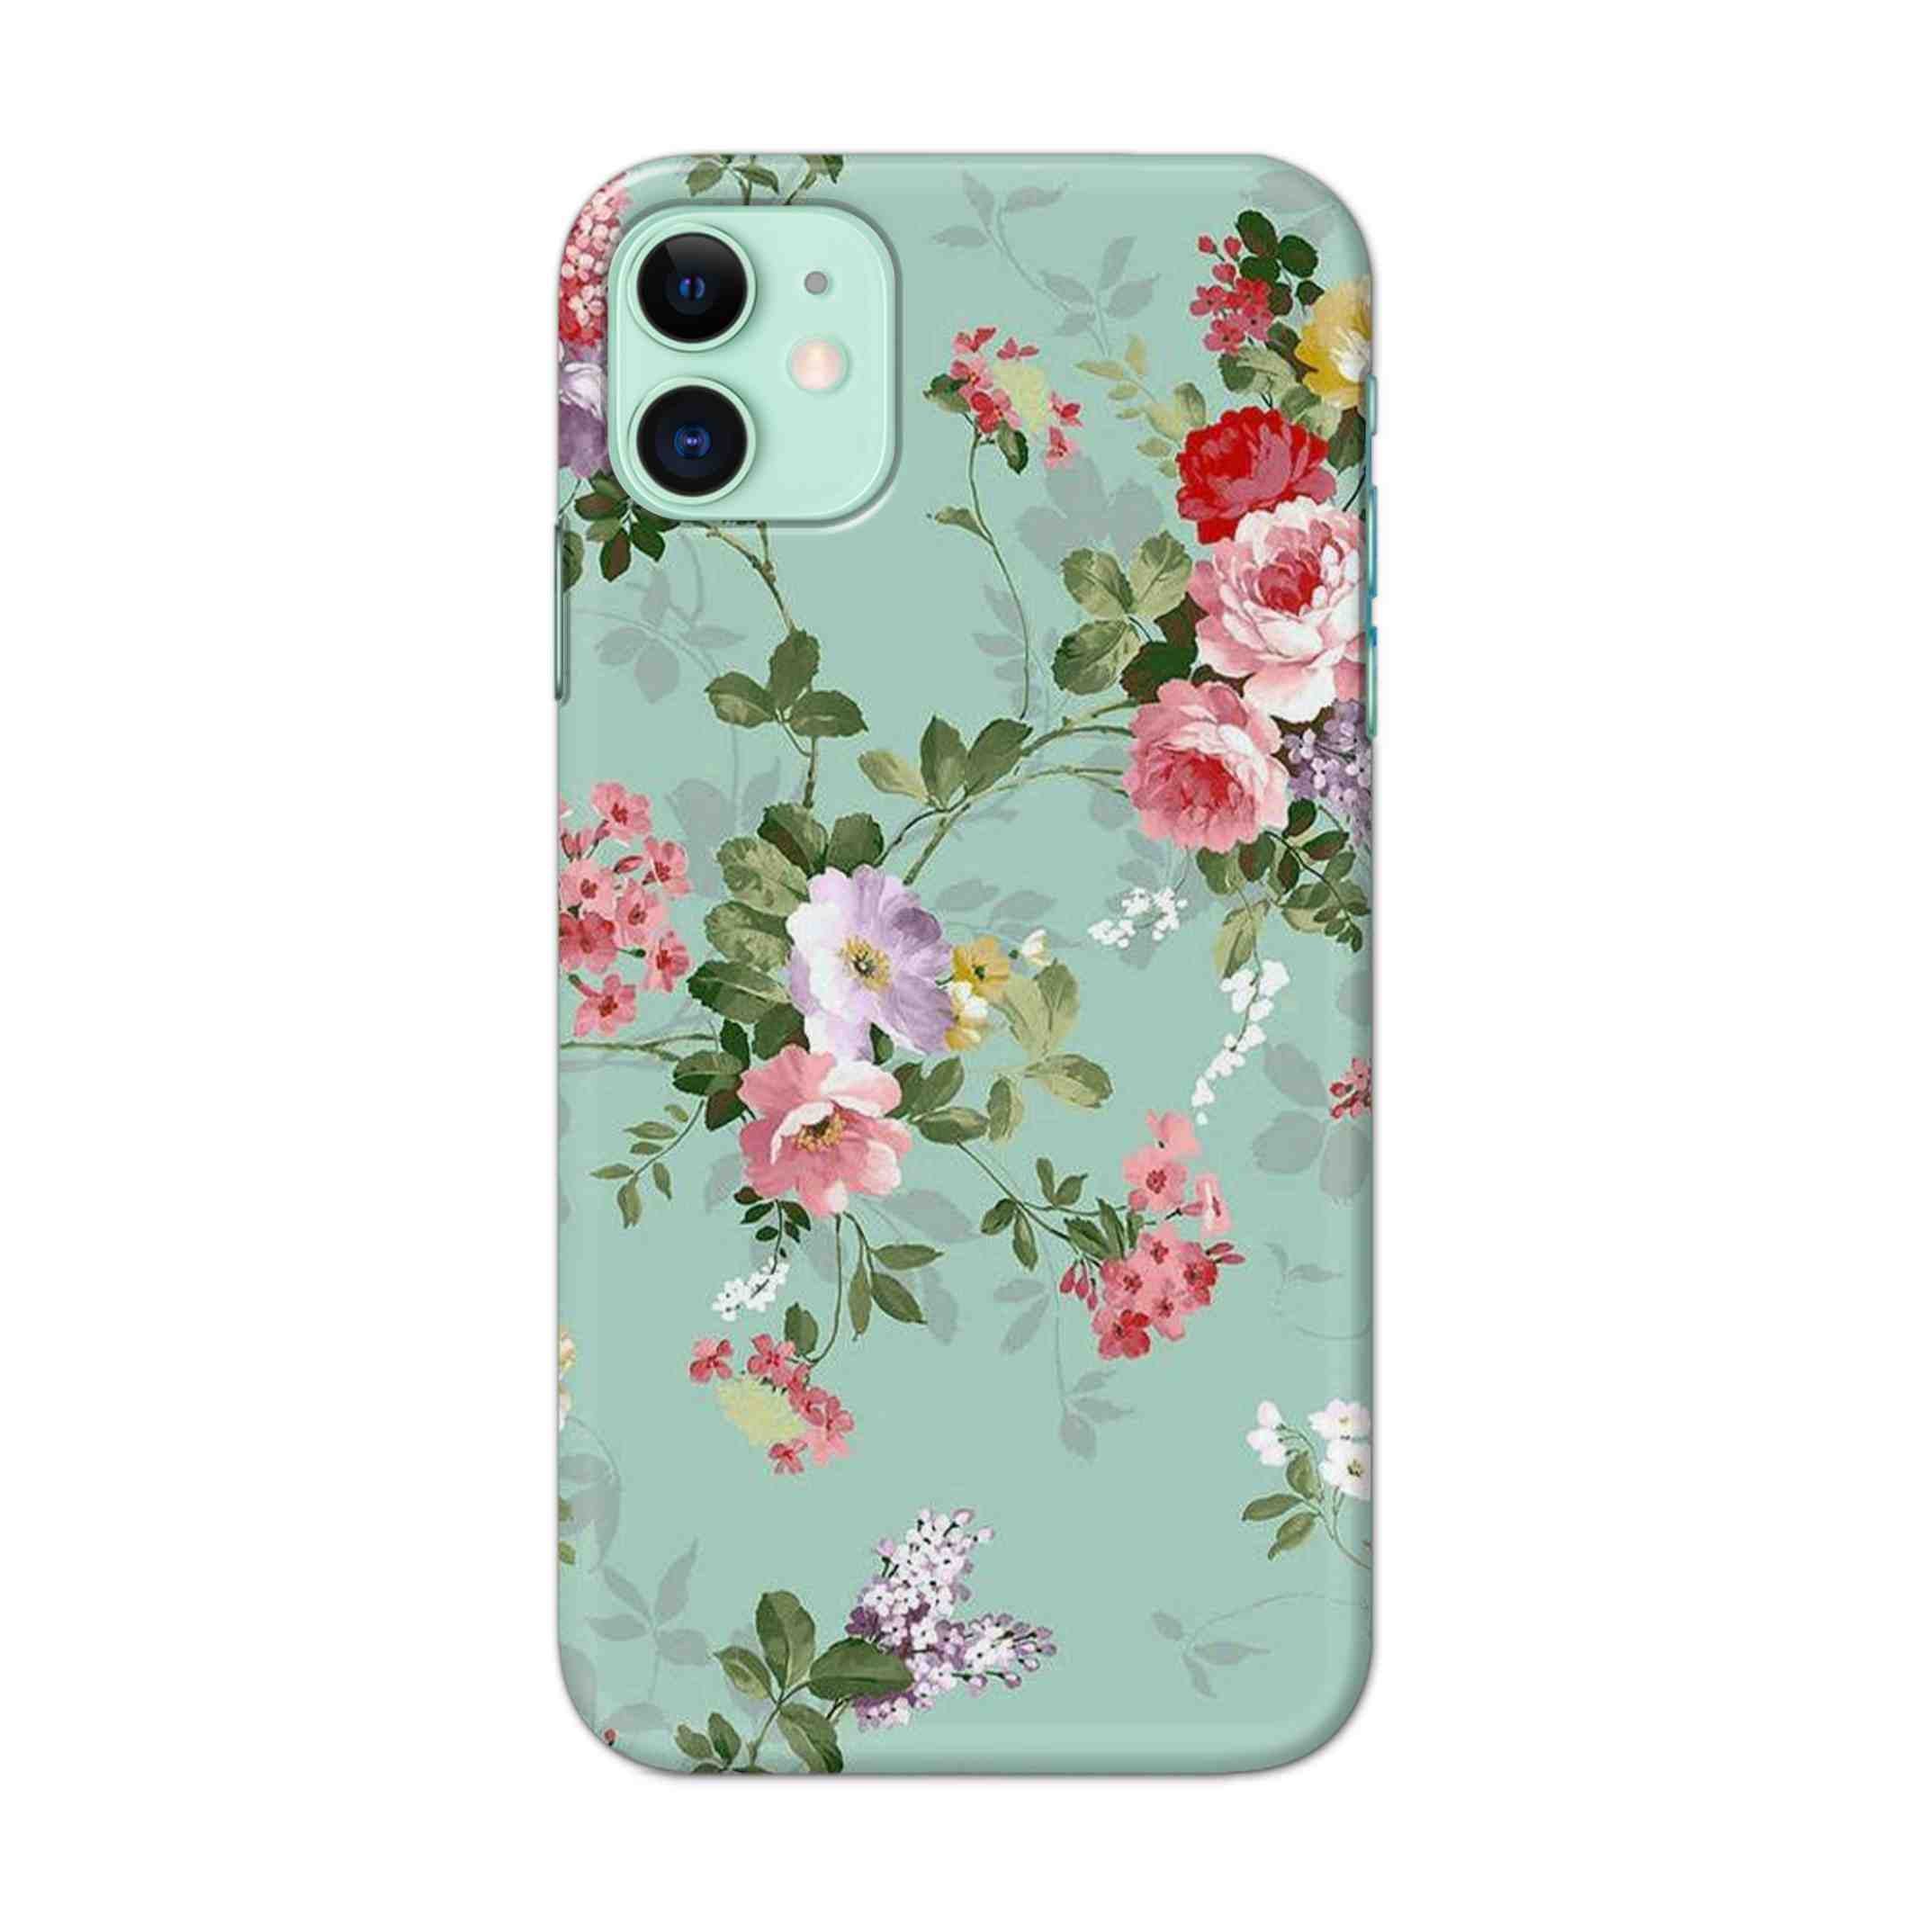 Buy Colourful Flower Hard Back Mobile Phone Case Cover For iPhone 11 Online